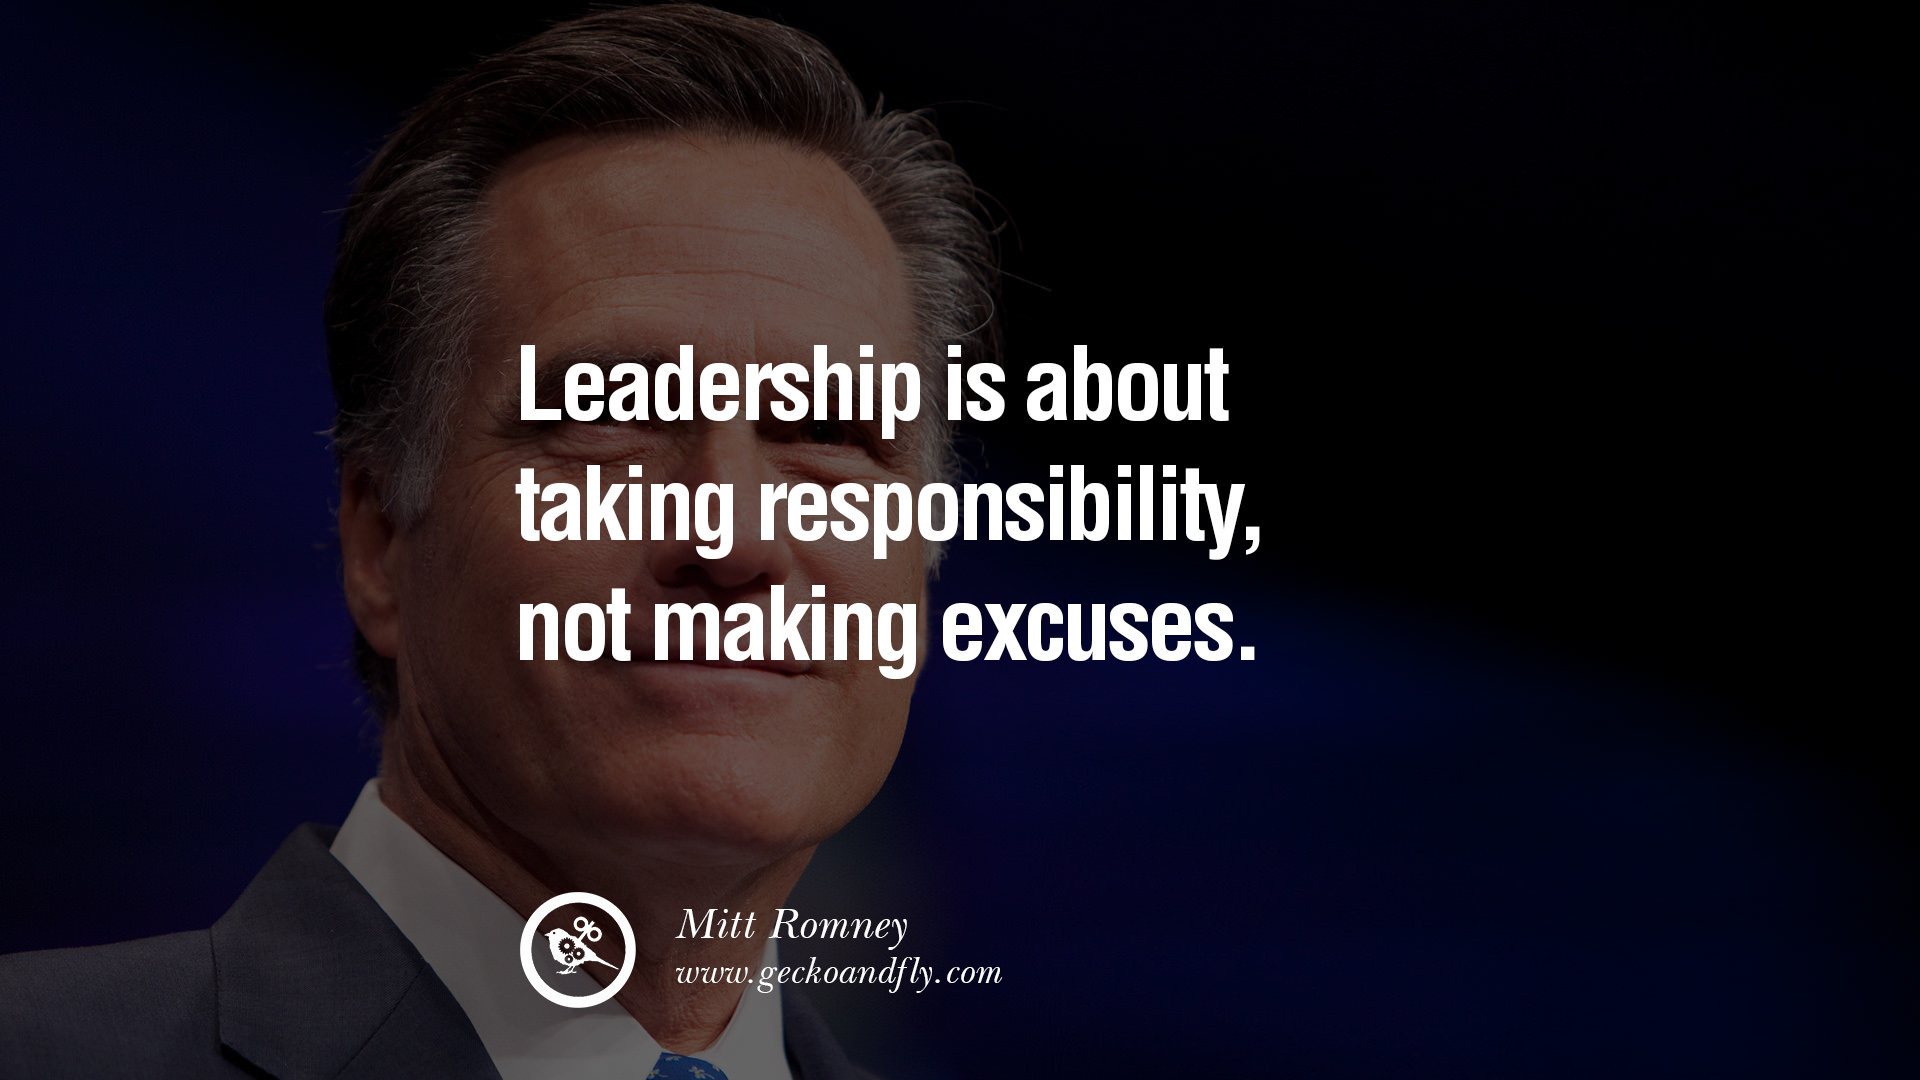 Inspiring Leadership Quotes
 Funny Motivational Quotes For Managers QuotesGram